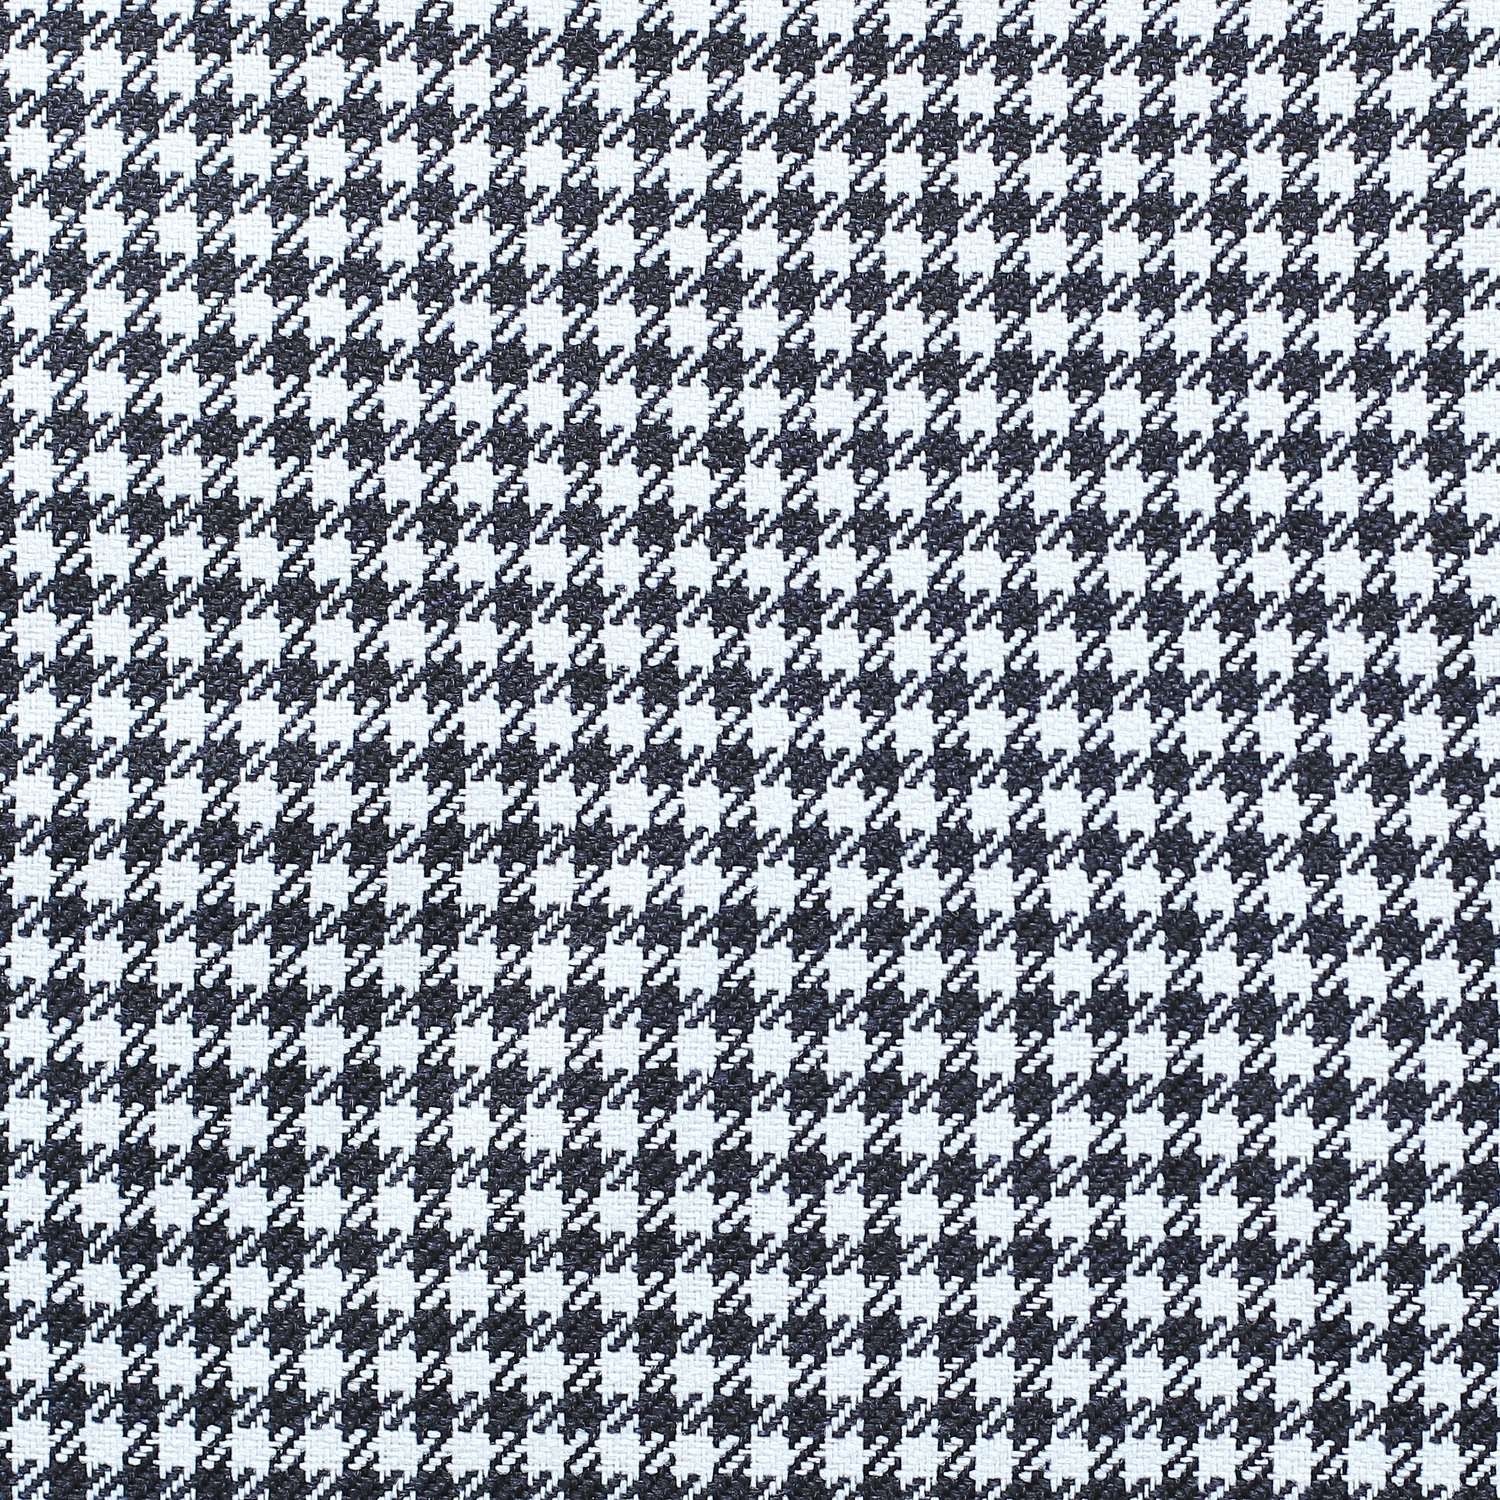 Set Of Two 18" X 18" Black And White Houndstooth Zippered Handmade Polyester Throw Pillow